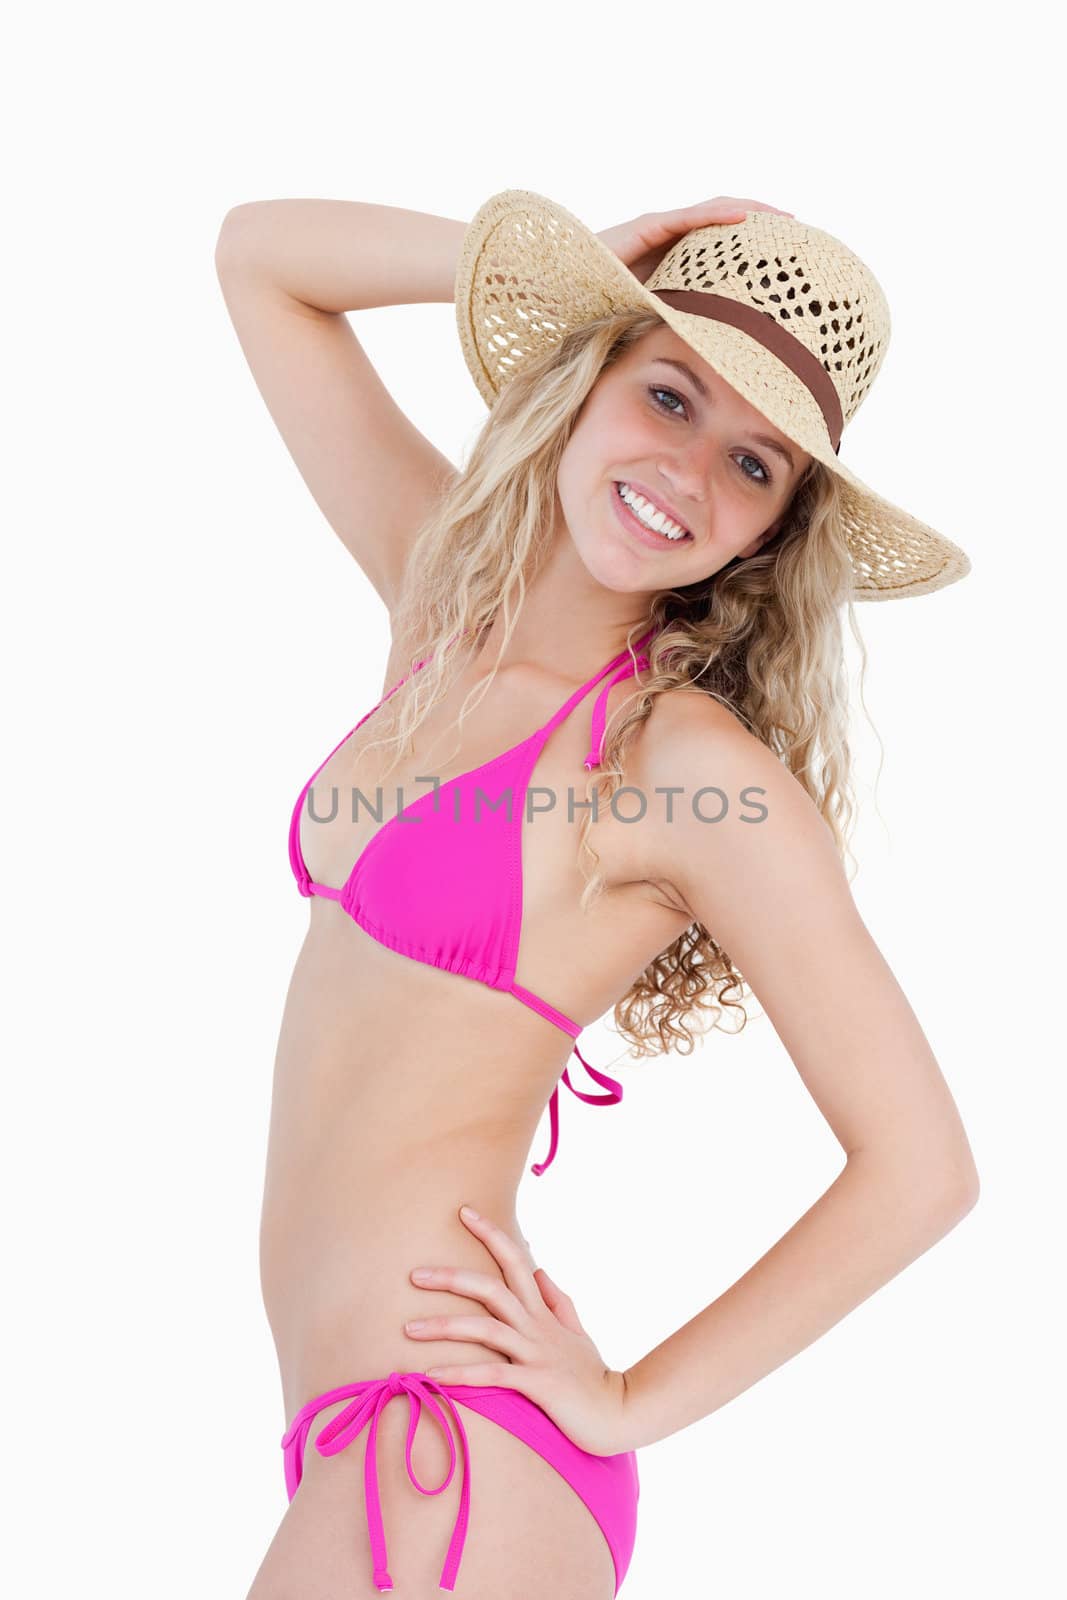 Attractive smiling teenager standing upright with a hand on her hip while holding her hat